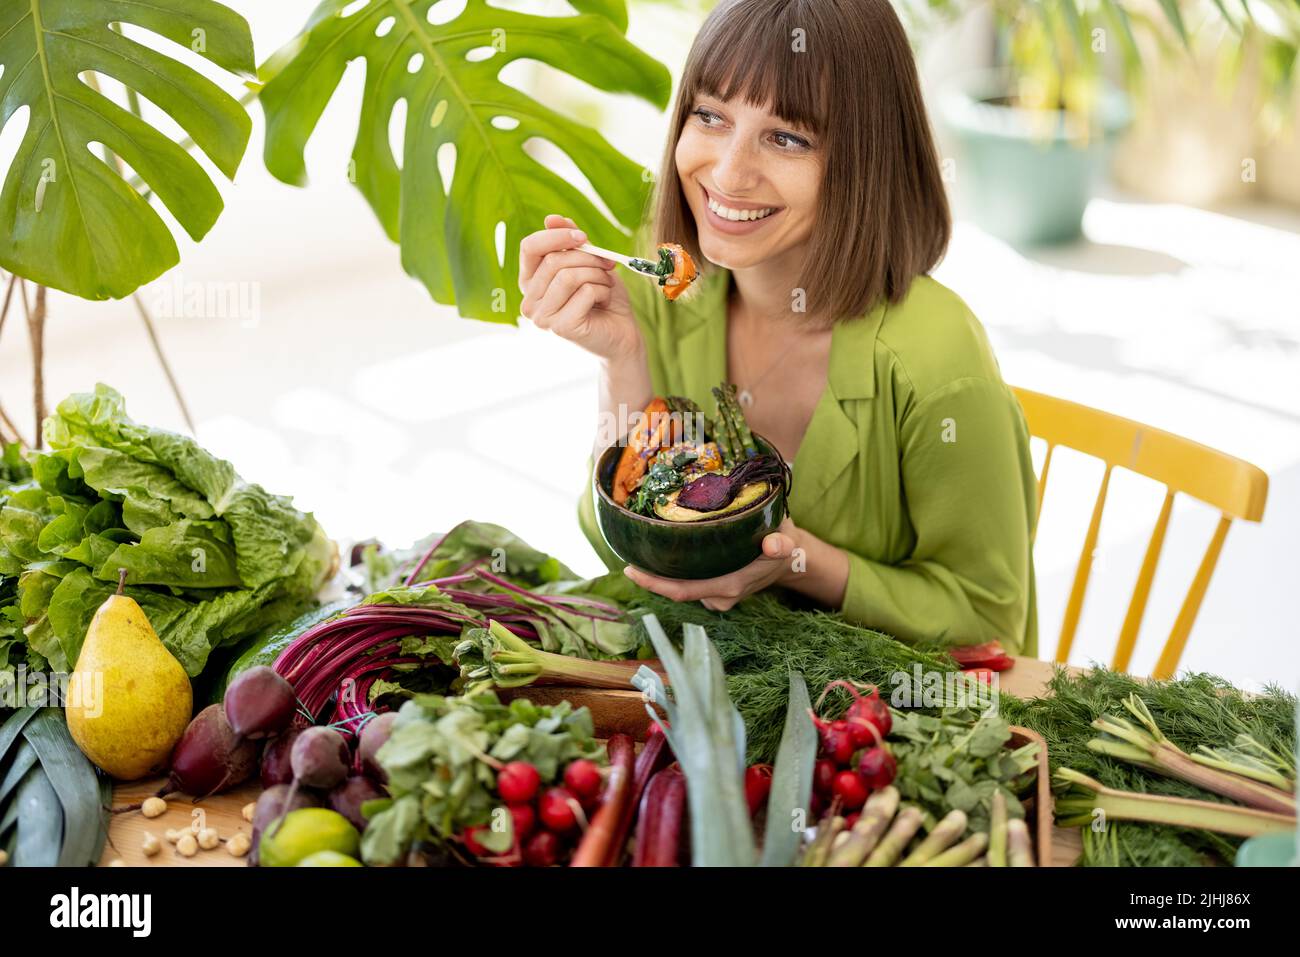 Woman with fresh healthy food indoors Stock Photo